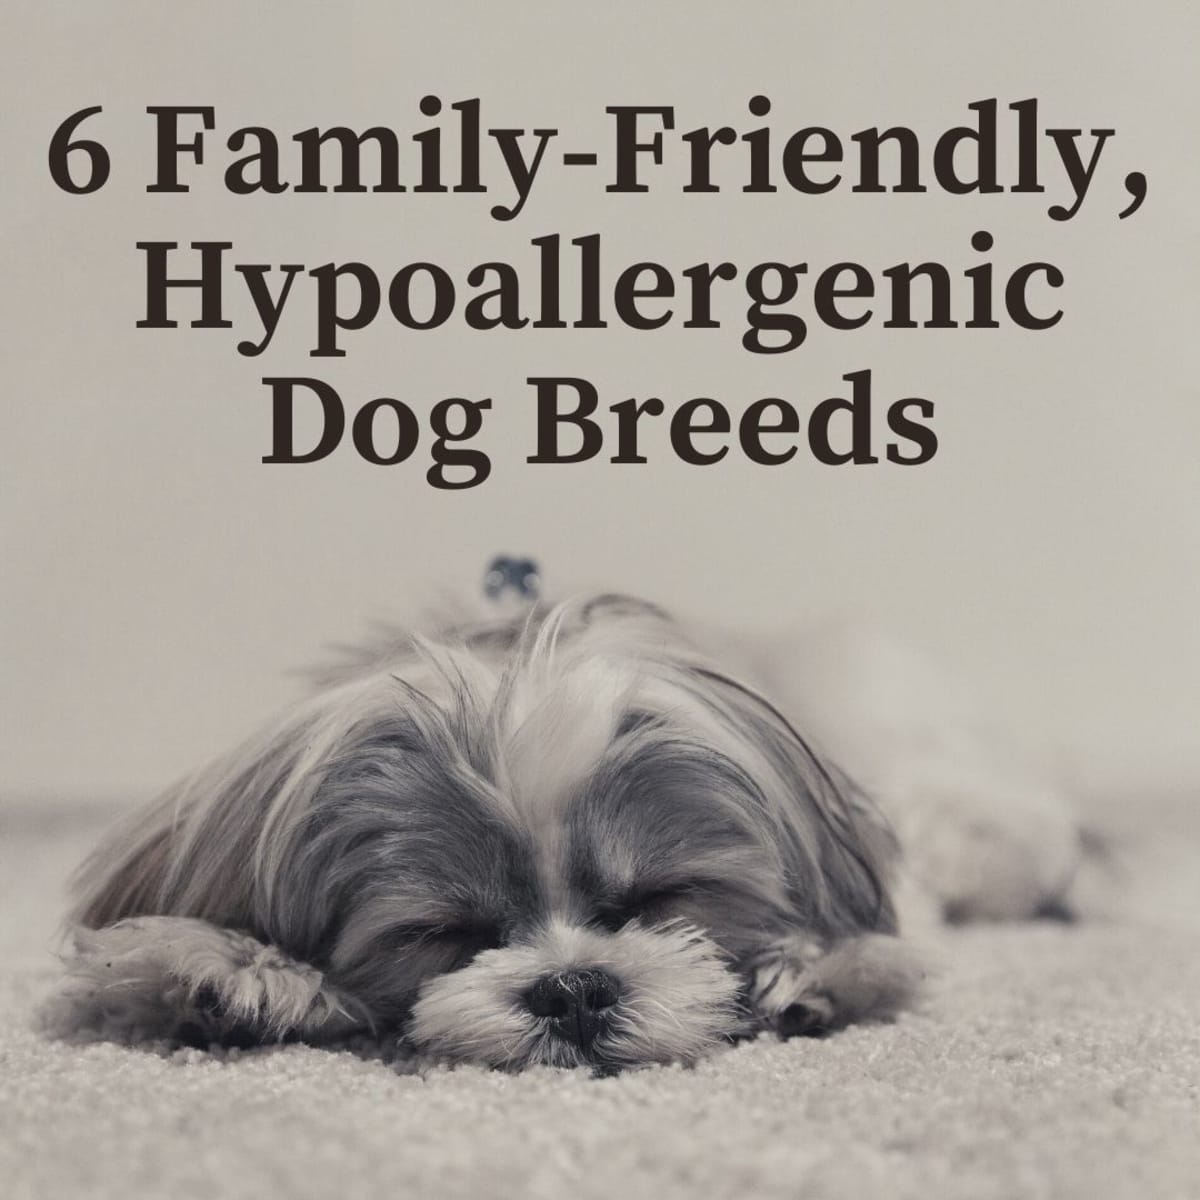 Six Hypoallergenic Dog Breeds That Are Great With Kids - PetHelpful